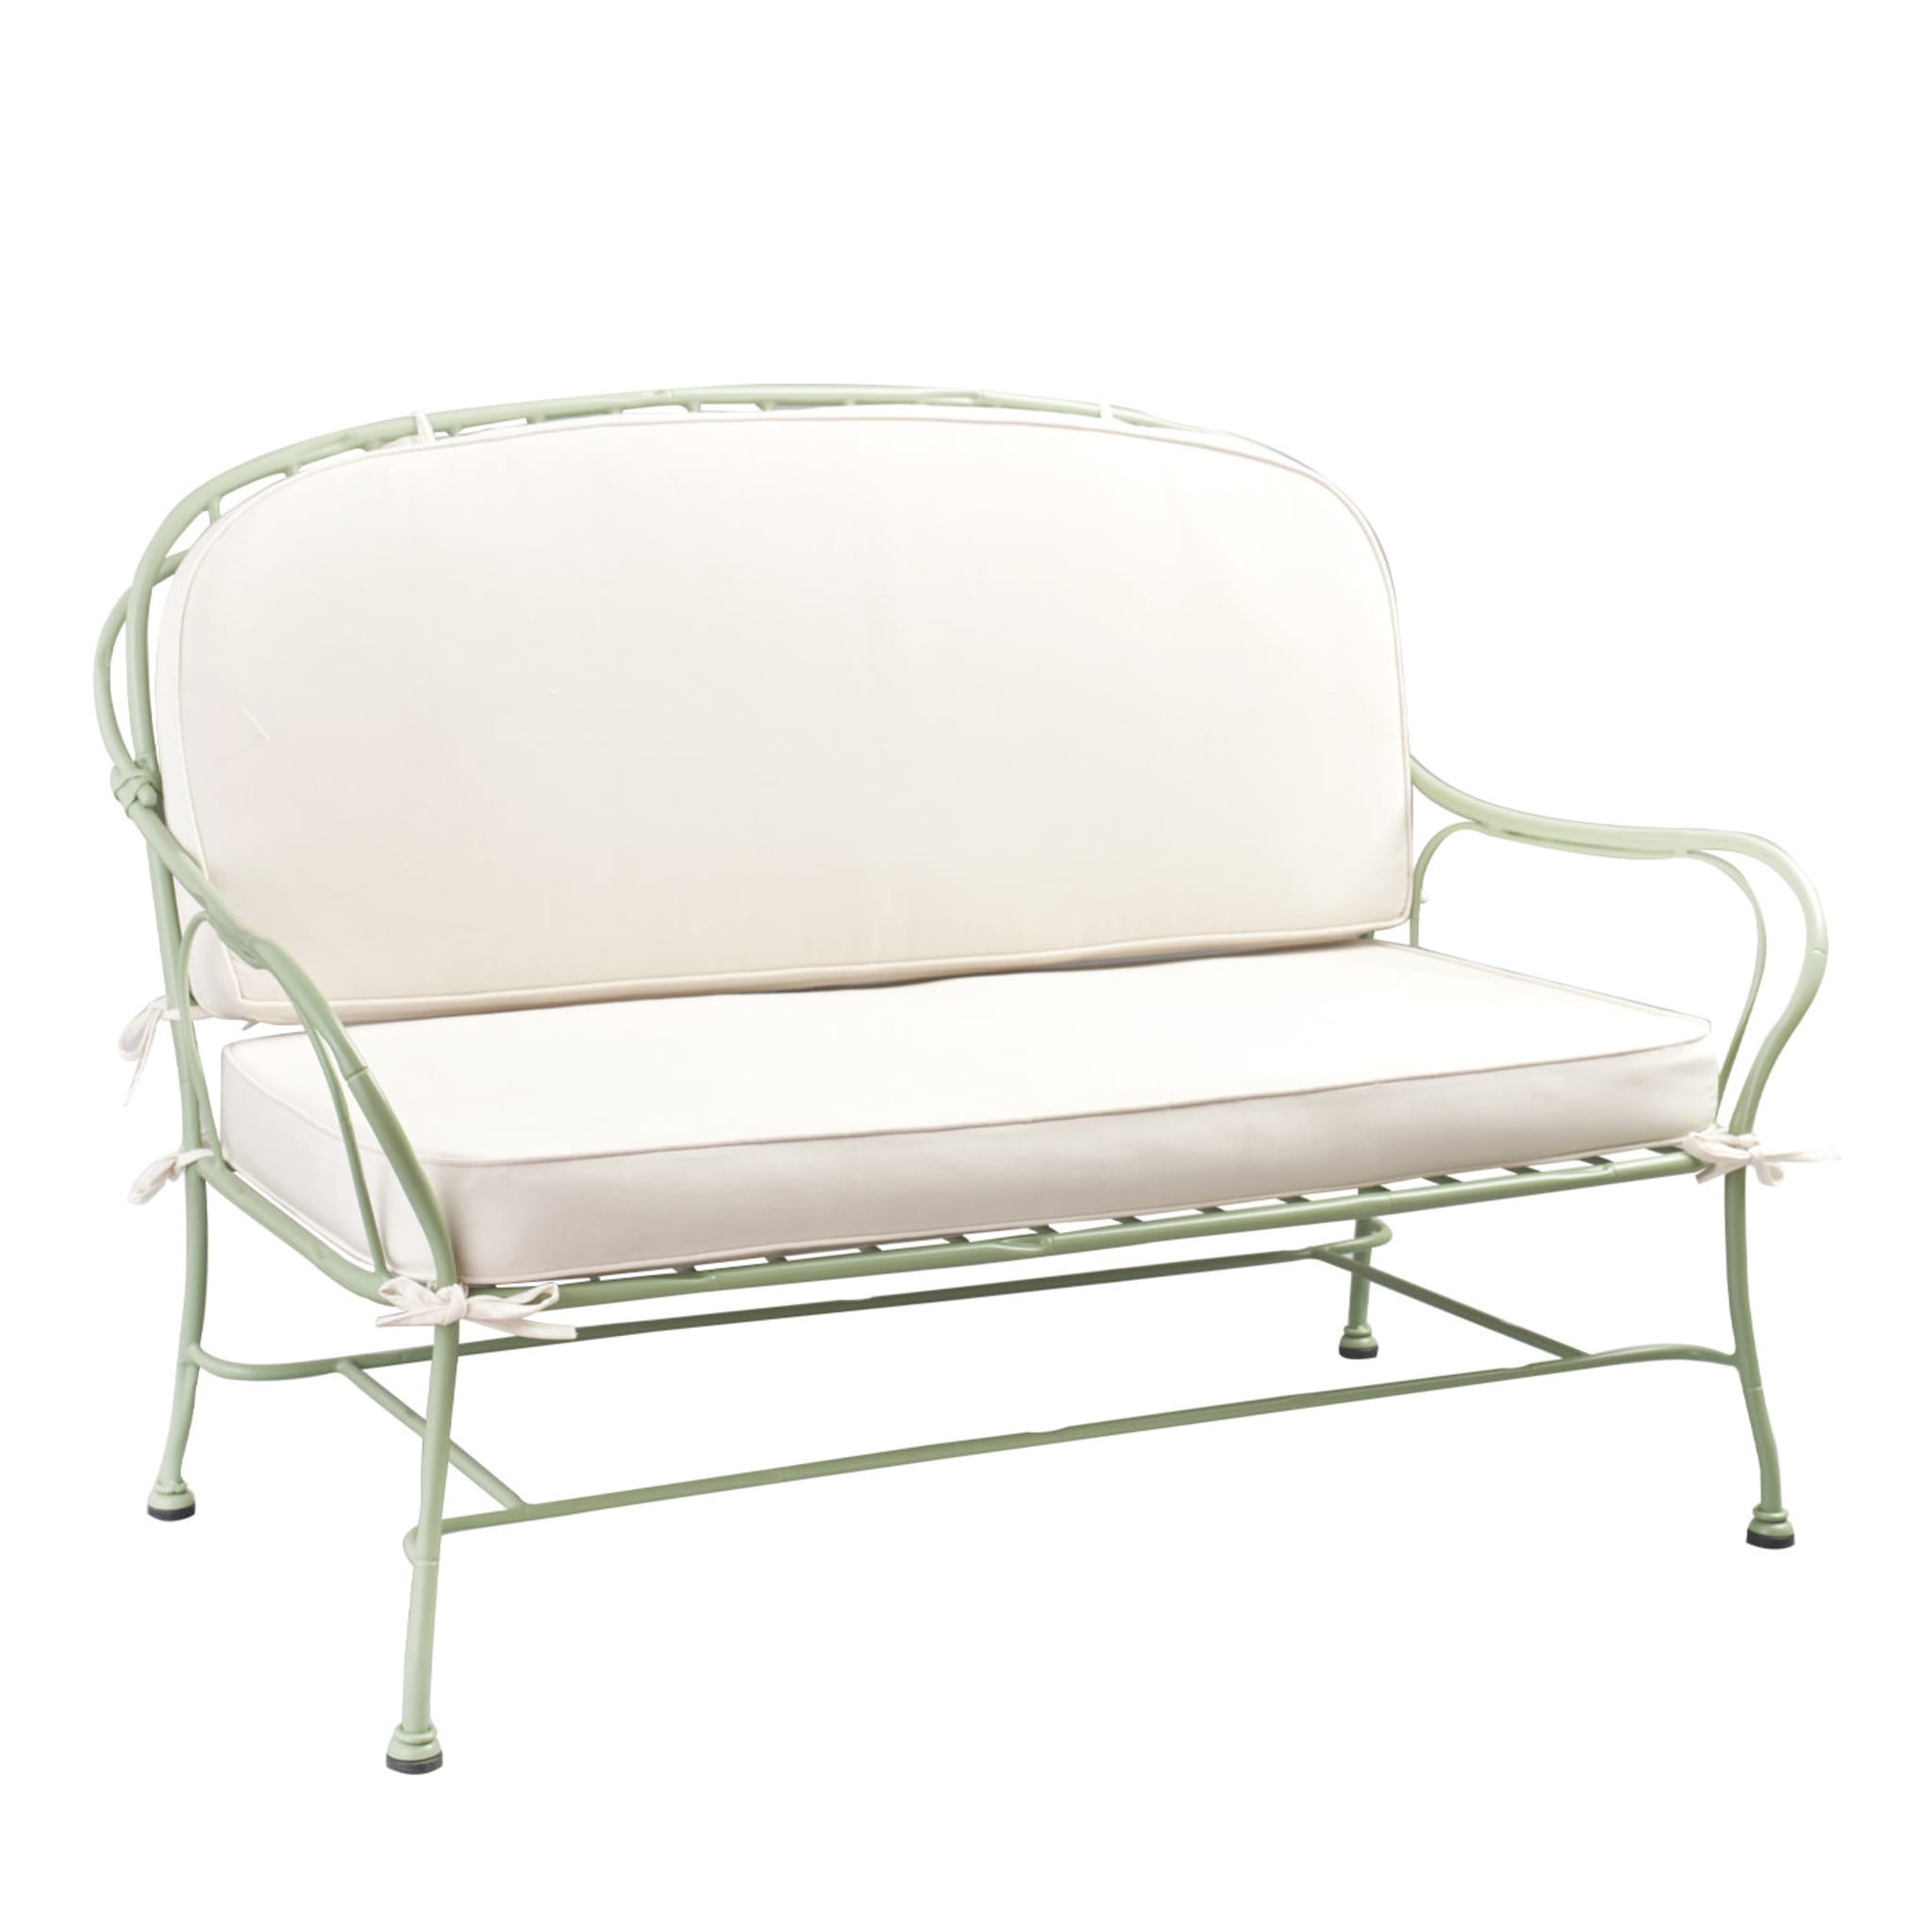 Bamboo Design Curved Green Wrought Iron Sofa - Main view